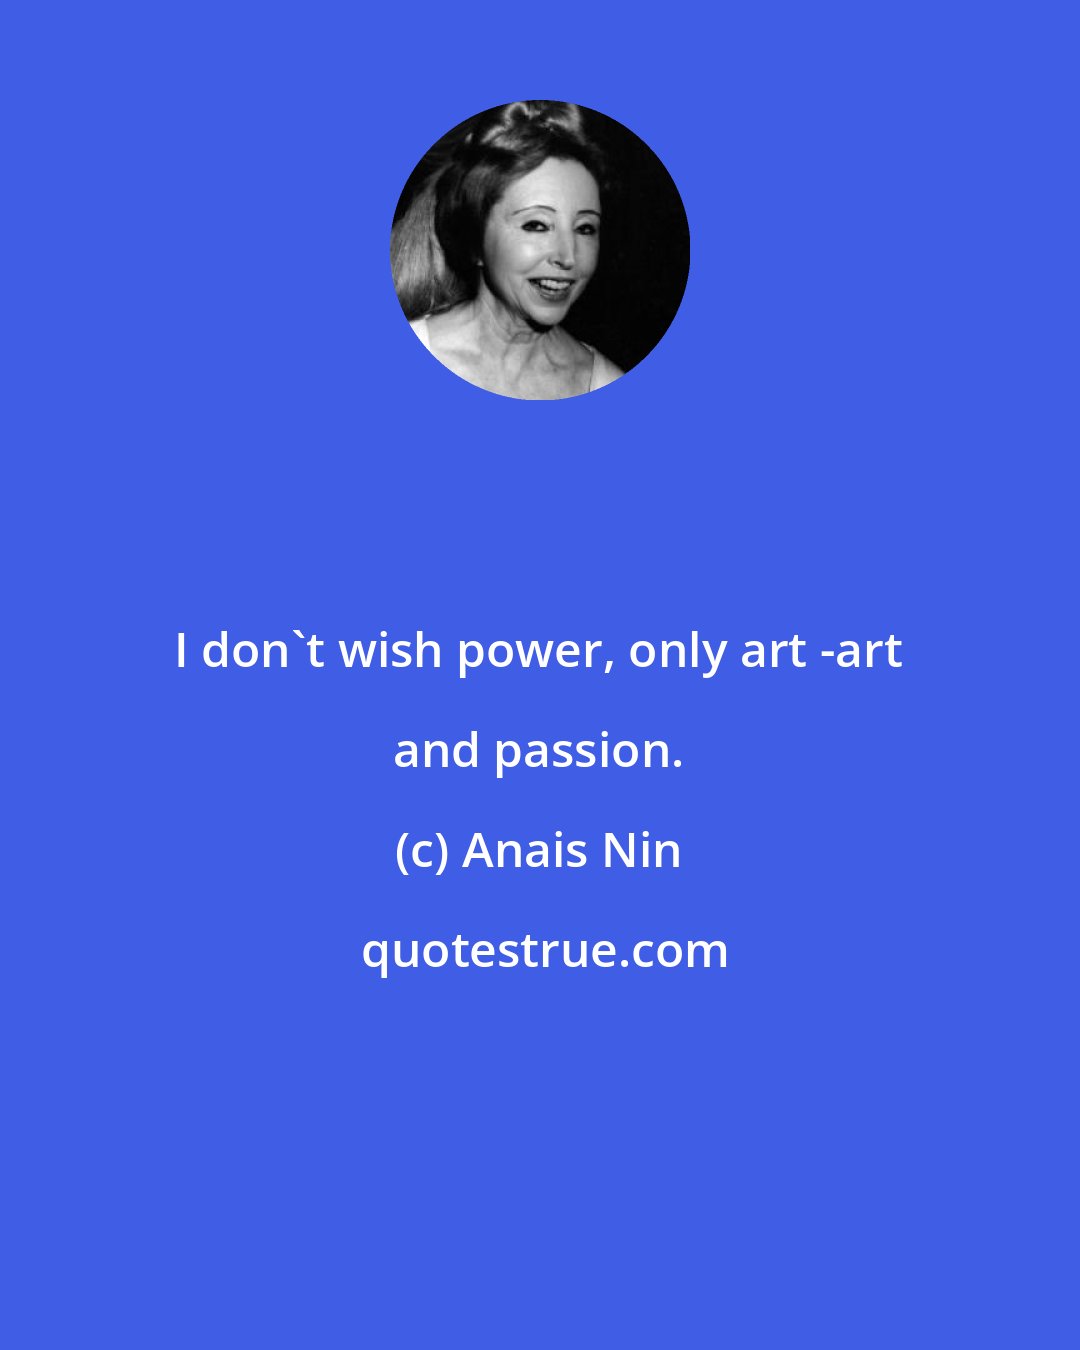 Anais Nin: I don't wish power, only art -art and passion.